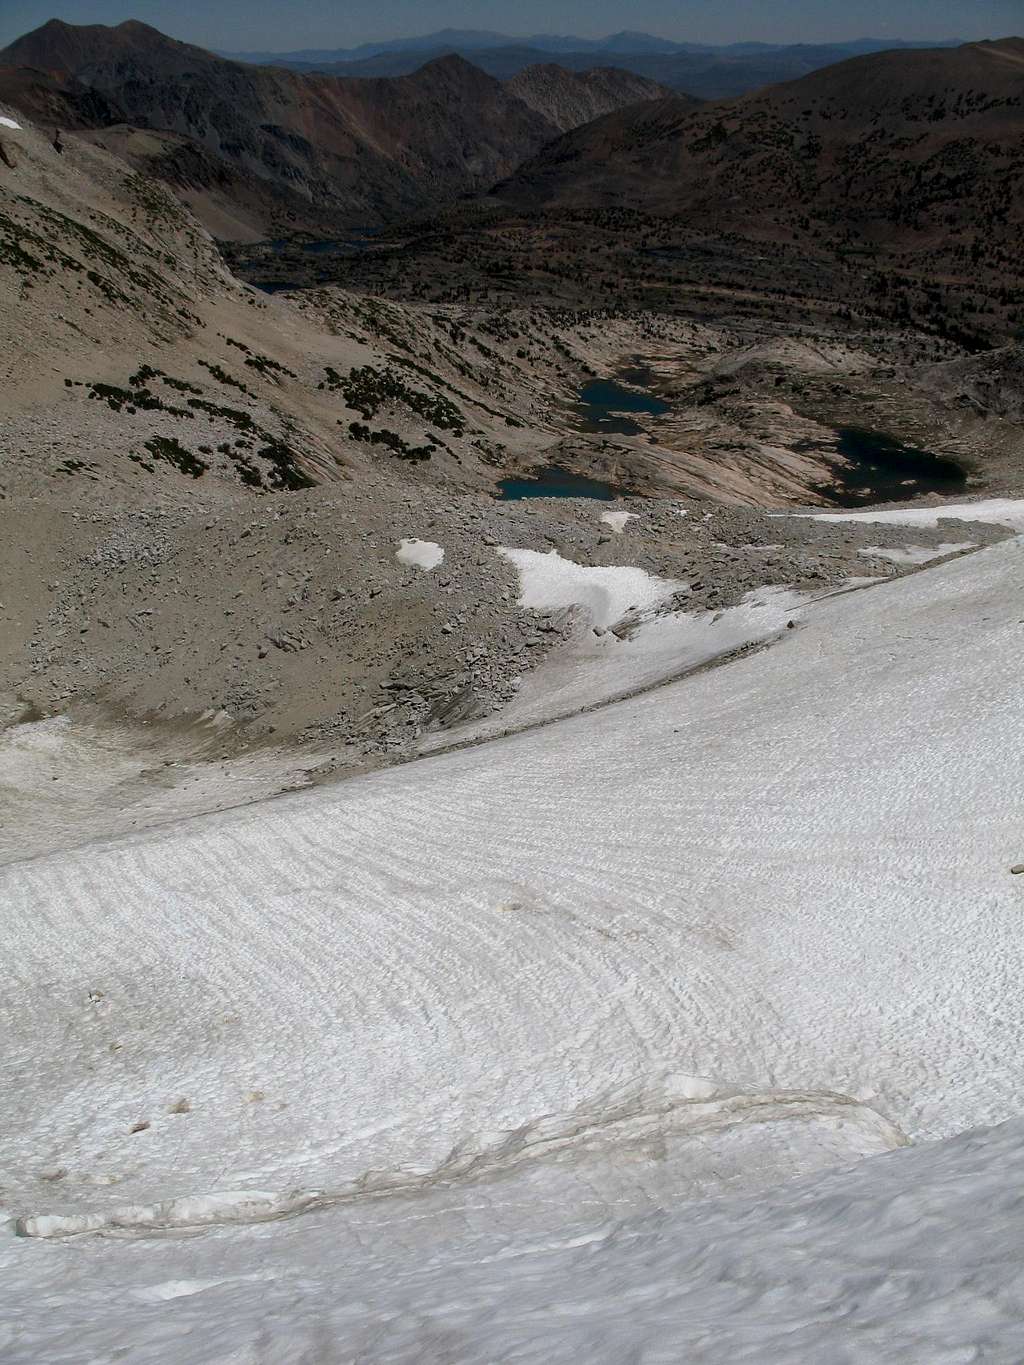 conness glacier seen from its bergshrund